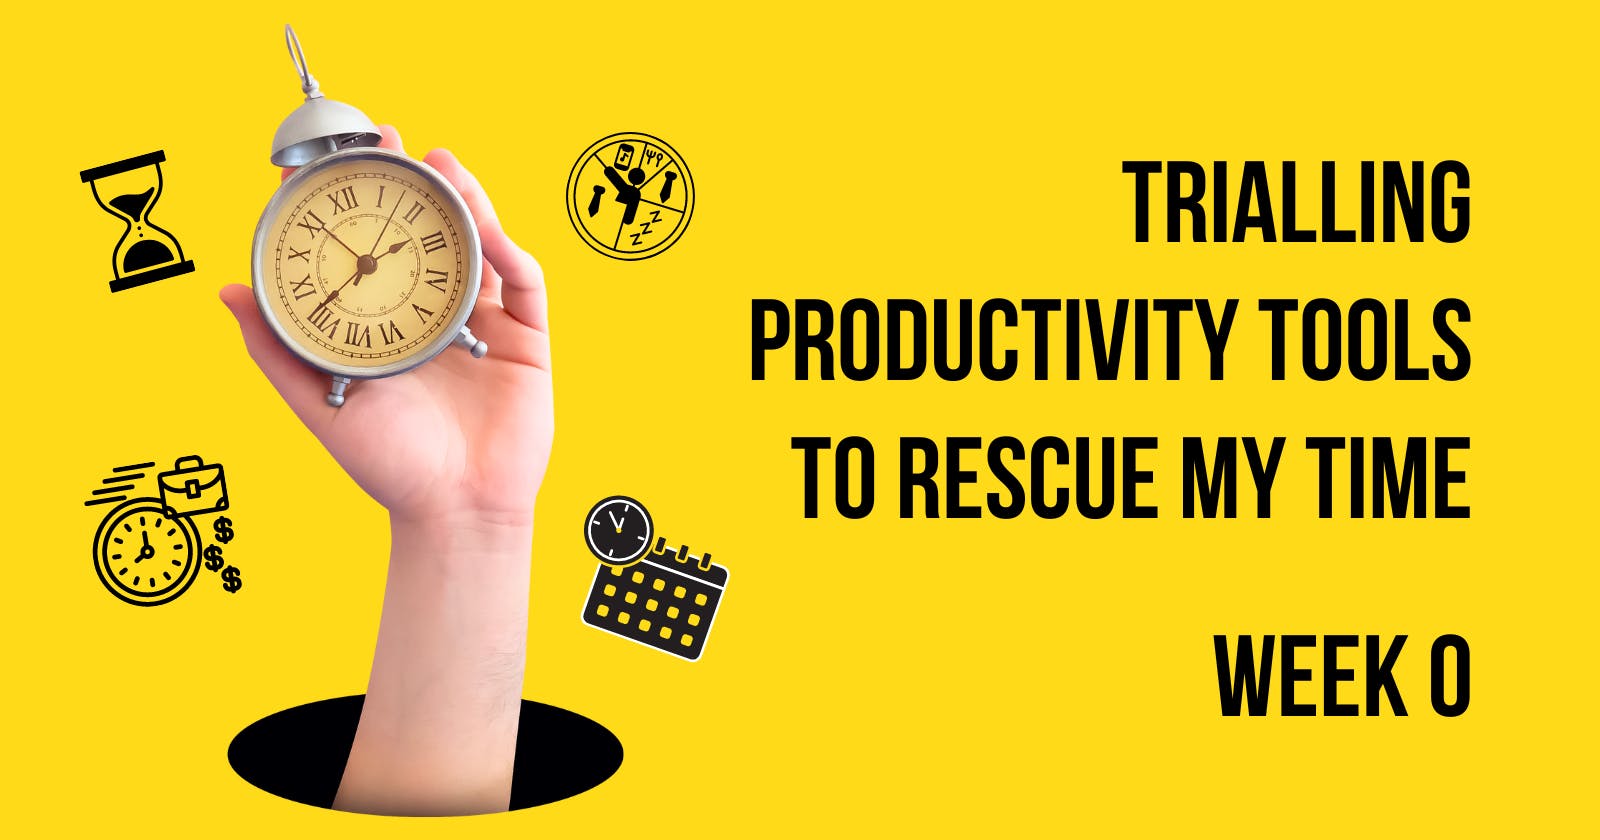 Trialling Productivity Tools to Rescue My Time [Week 0]